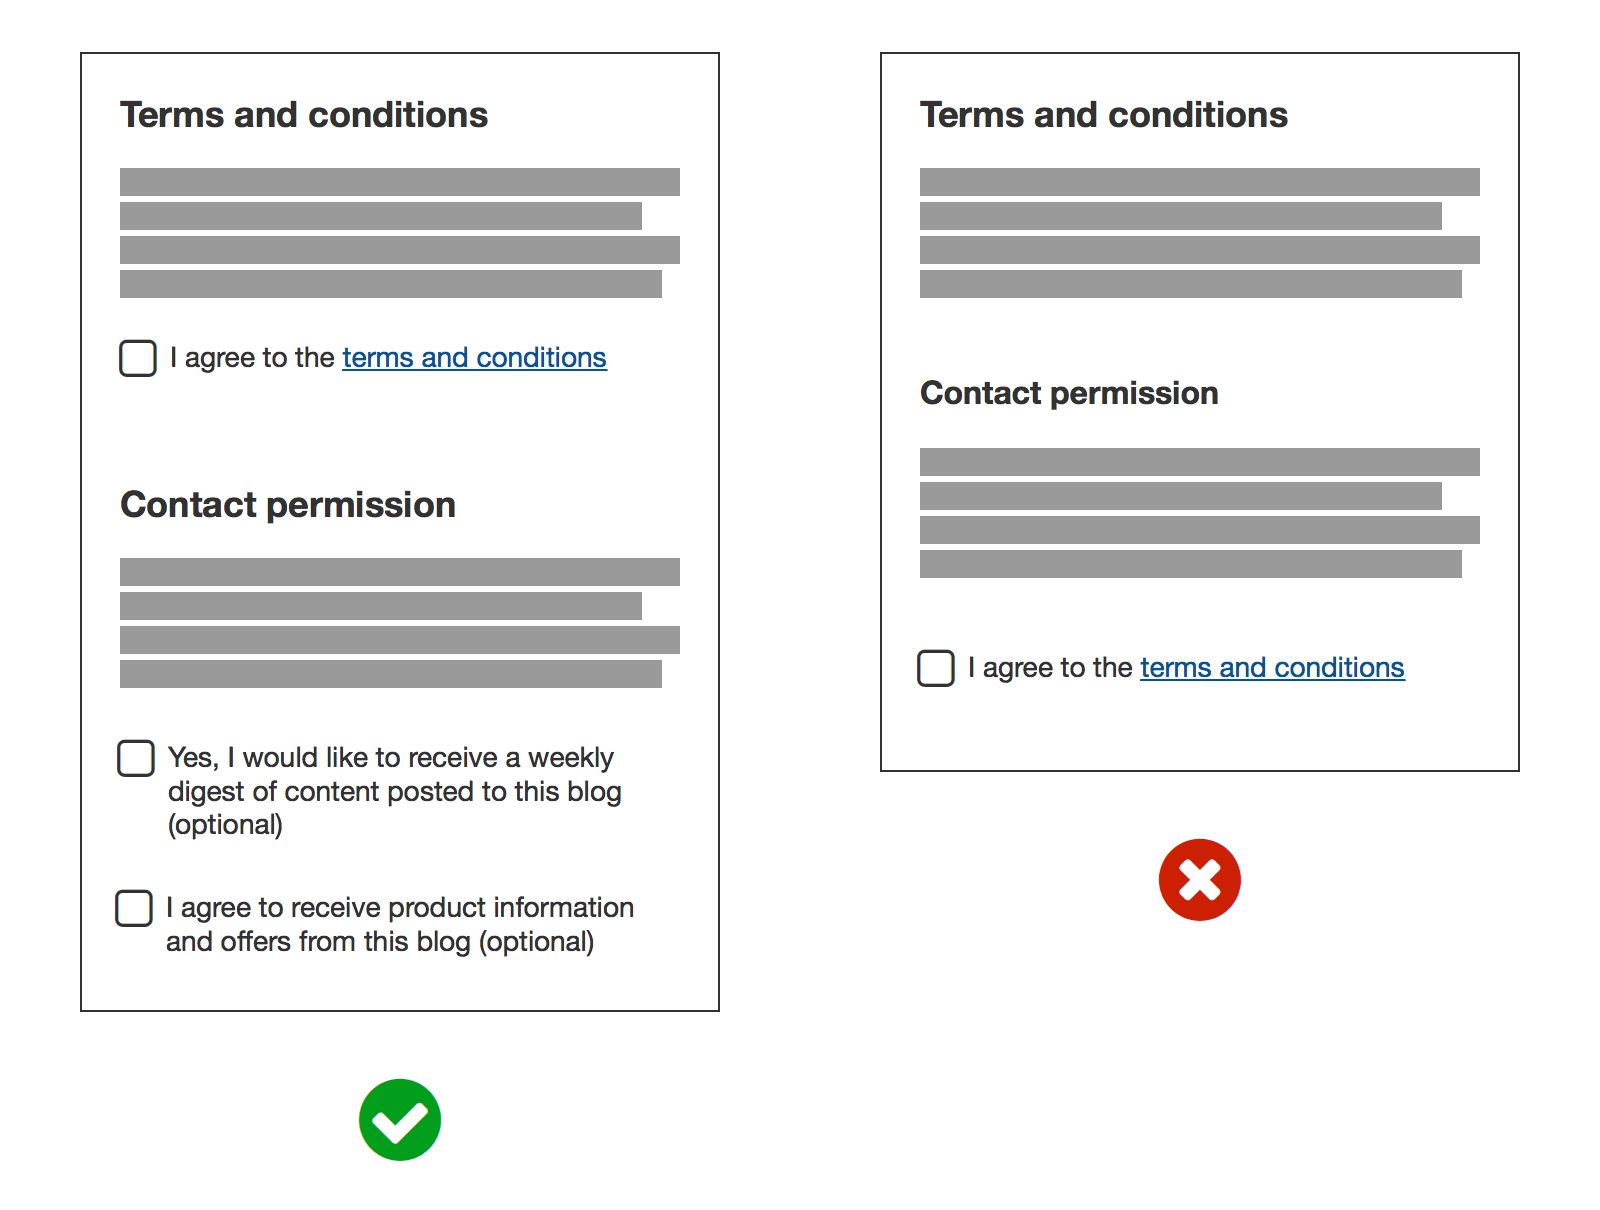 On the left, a user has to agree to the Terms & Conditions to continue, and contact permission is optional. On the right, unless the person opts in for emails, they won’t be able to continue to the next step, which violates GDPR. Source: iubenda